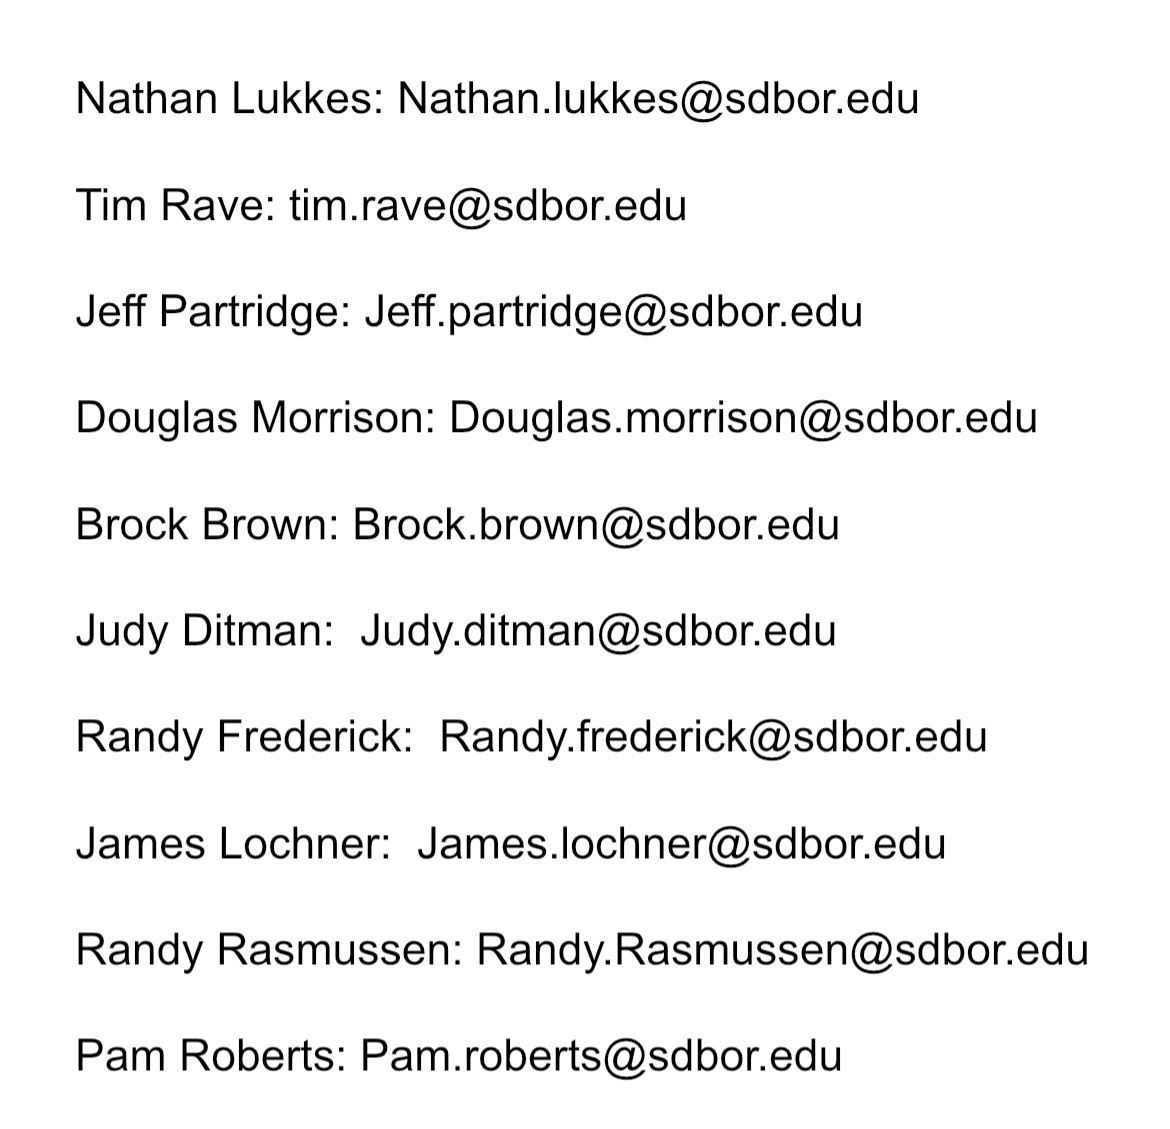 If you want to help fix this issue and protect students and faculty, the contact info of BOR members is publicly available! Send emails to our public officials and let them know this policy harms student and faculty speech! 11/11